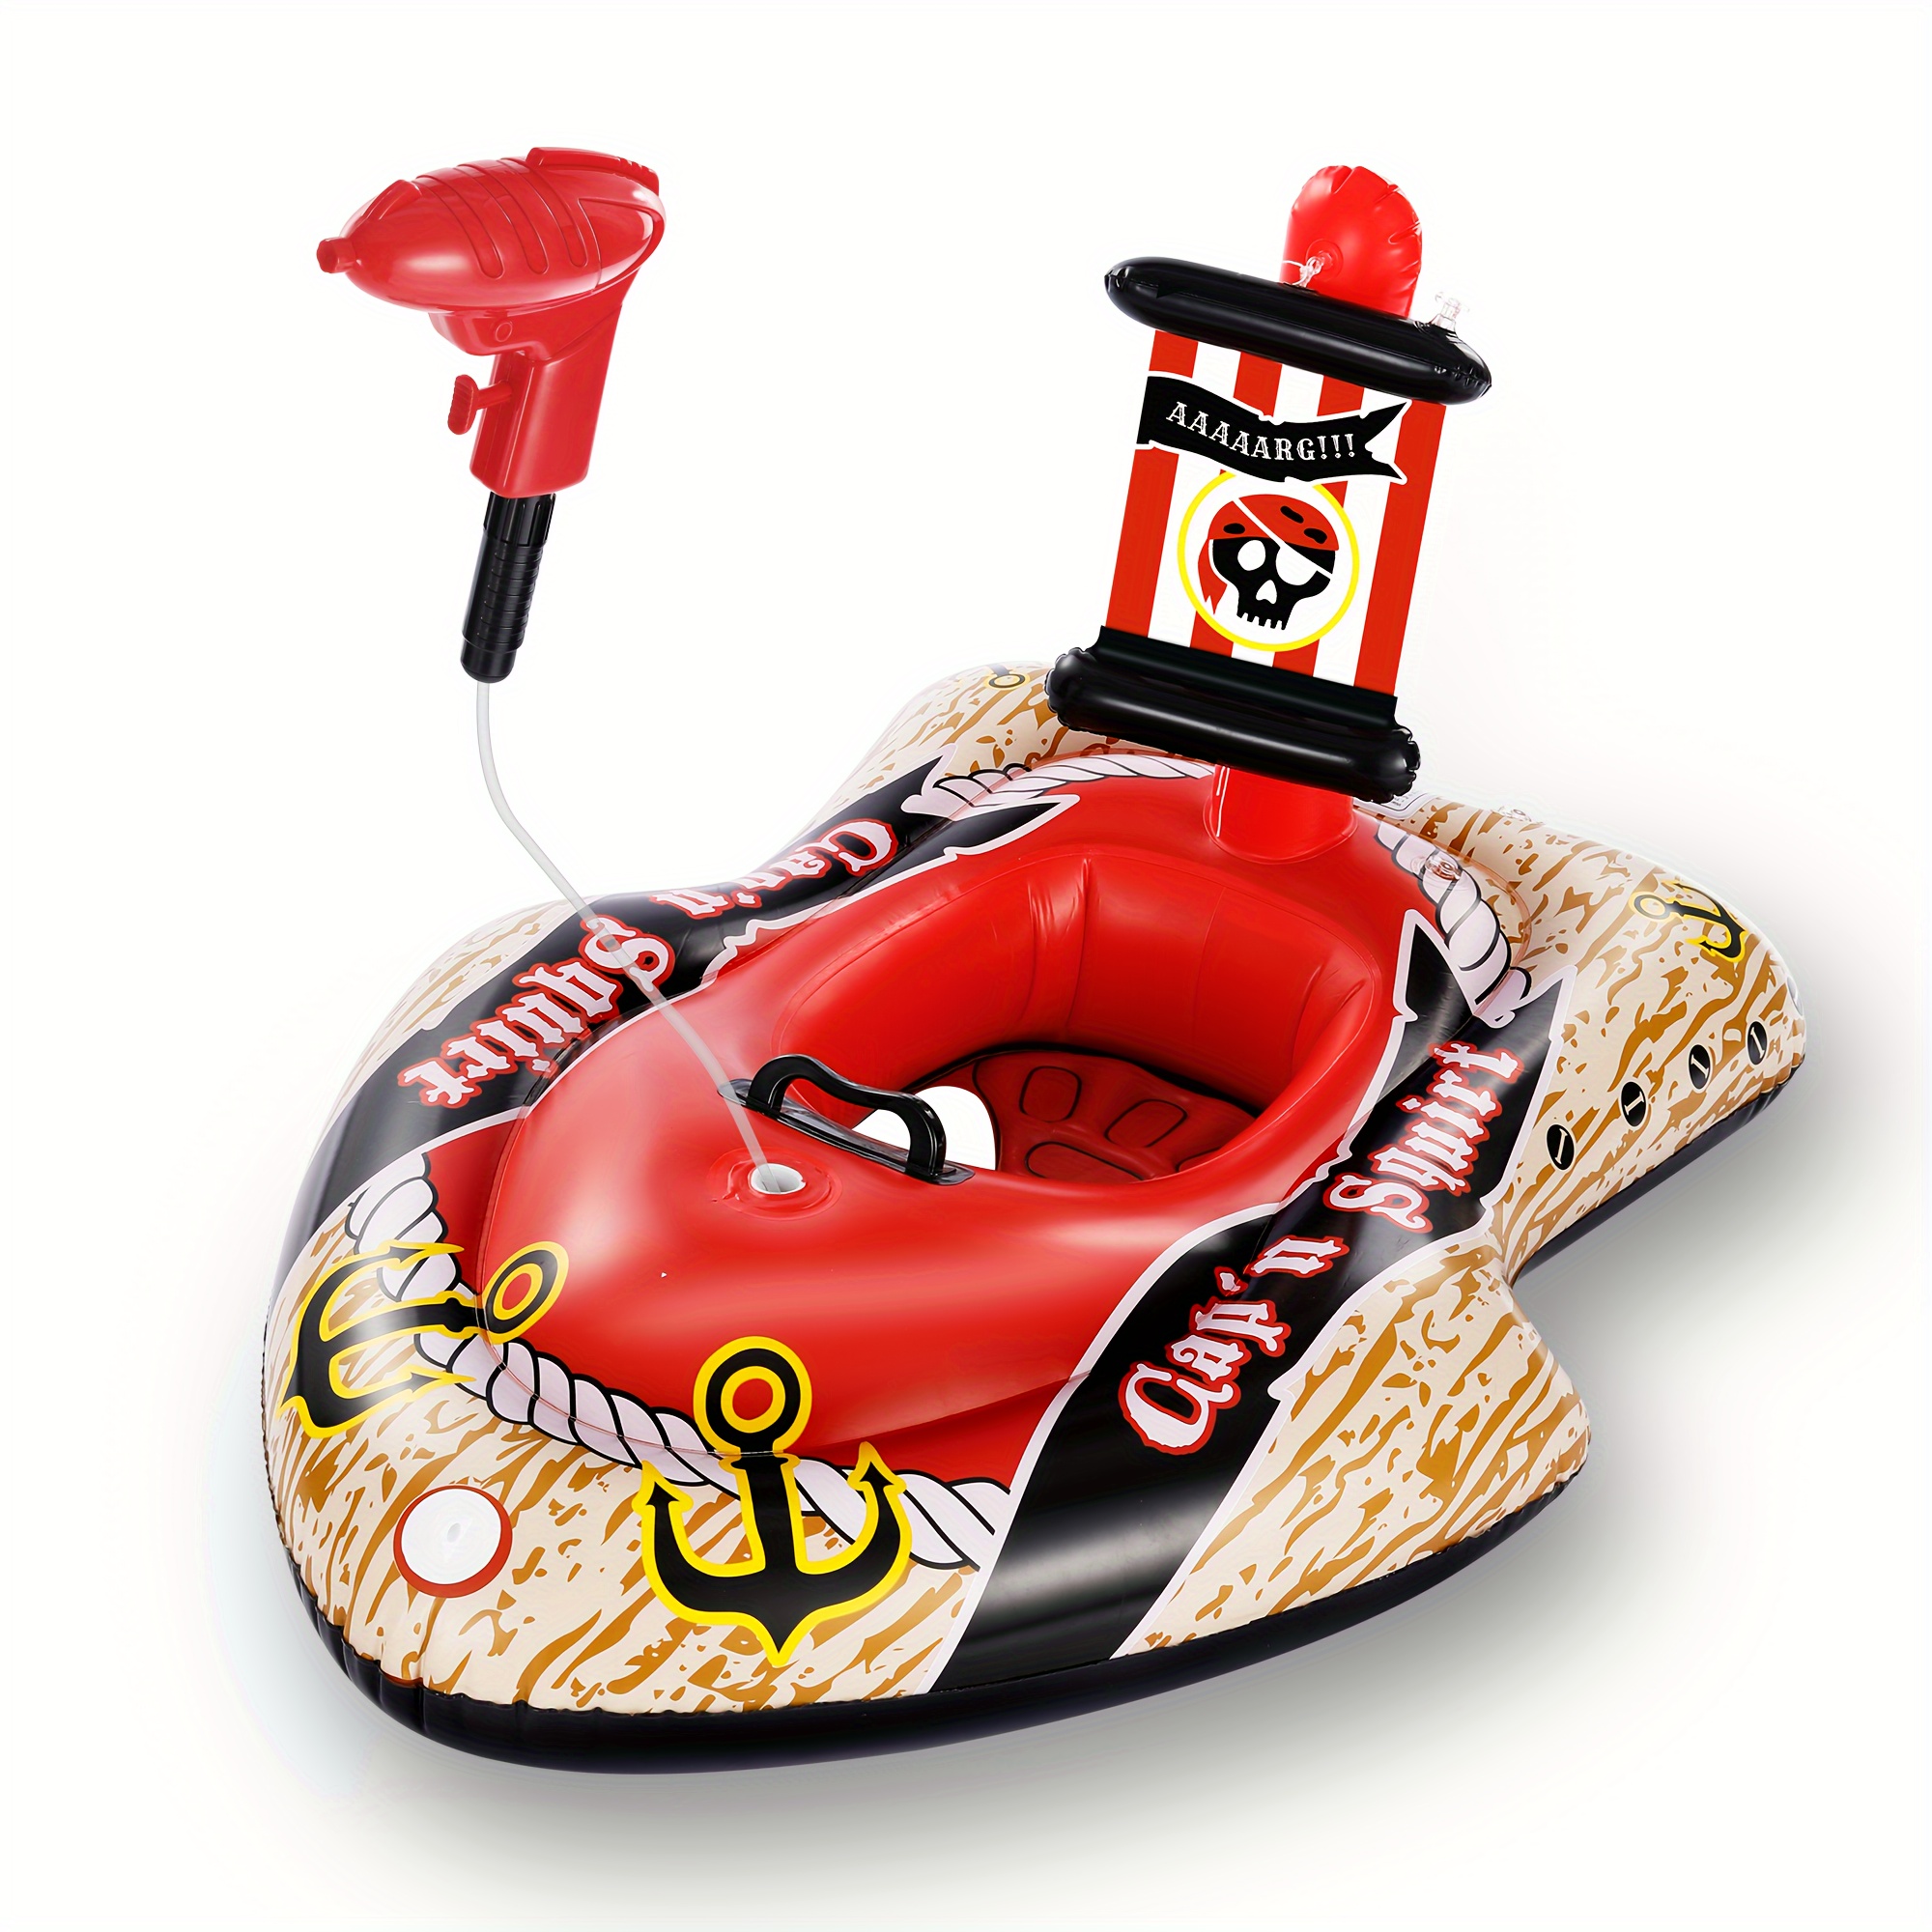 

Bietrun Pool Floats Kids With Water Gun (pirate-style)(with Pump), Fun Solo Kids Swimming Inflatable Thickening Rafts Pool Lounger Pirate Ship For Boys Girls Pool Party Gift, Beach, Lake Sunbathing